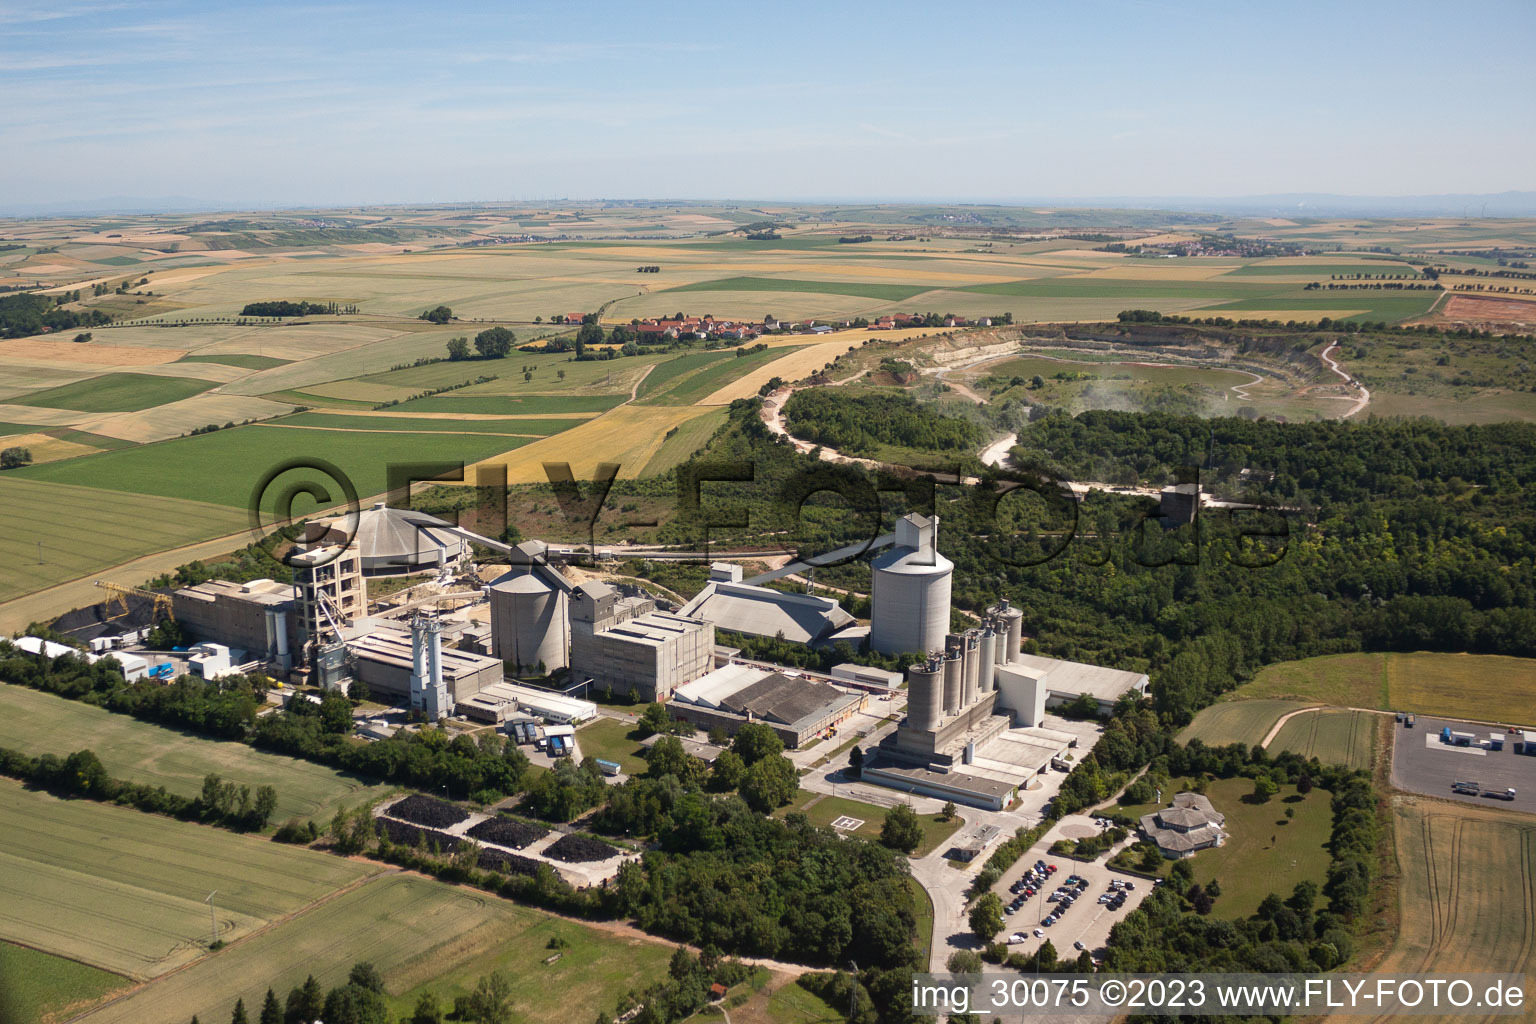 Dyckerhoff cement plant in Göllheim in the state Rhineland-Palatinate, Germany from above